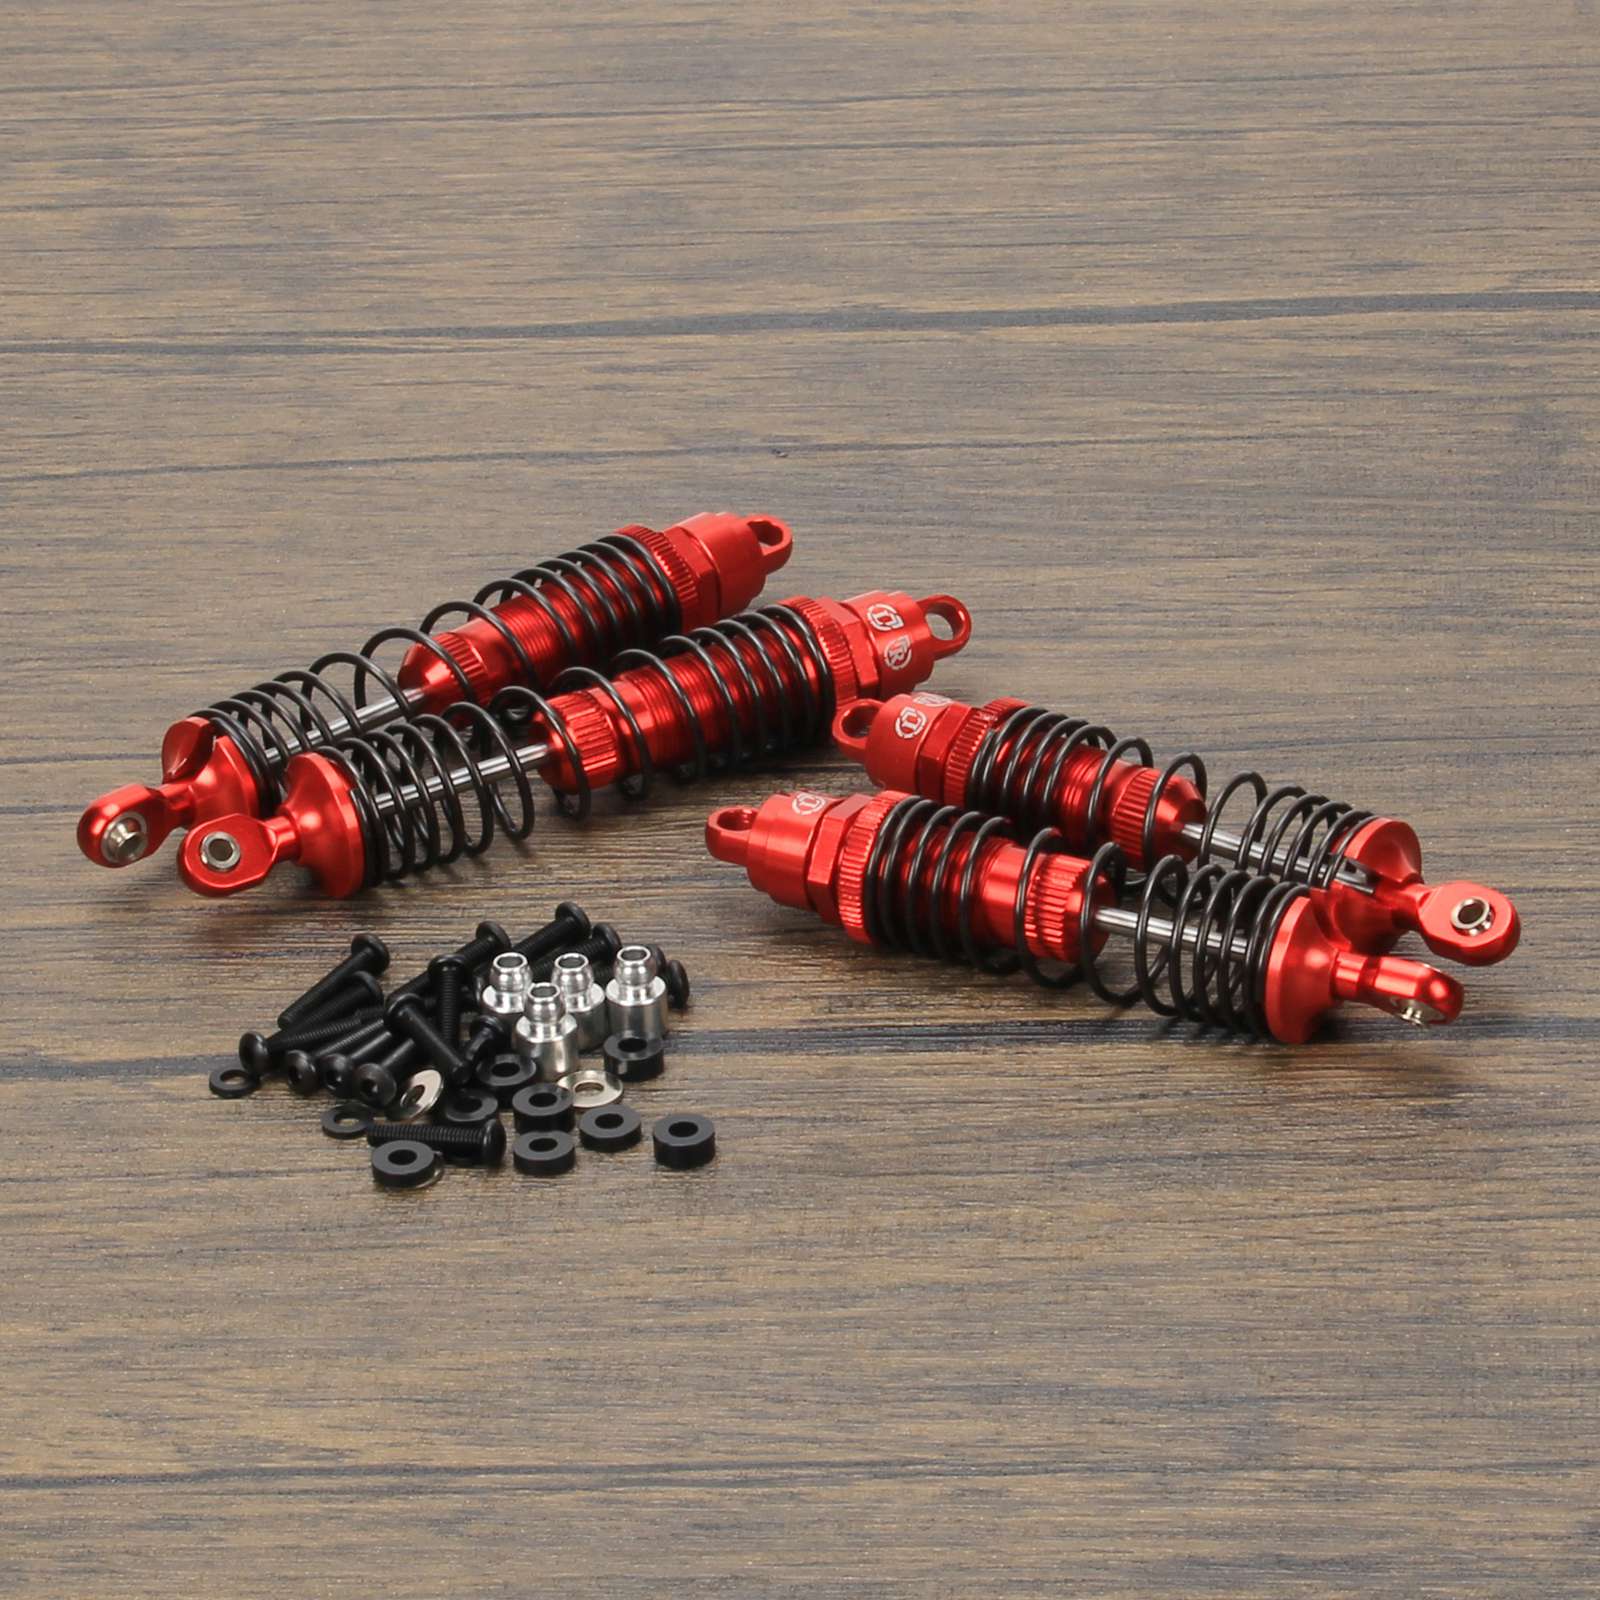 RCAWD TRAXXAS SLASH 2WD Red RCAWD Aluminum Shocks Absorber oil-filled type for 1/10 Slash 2wd Series